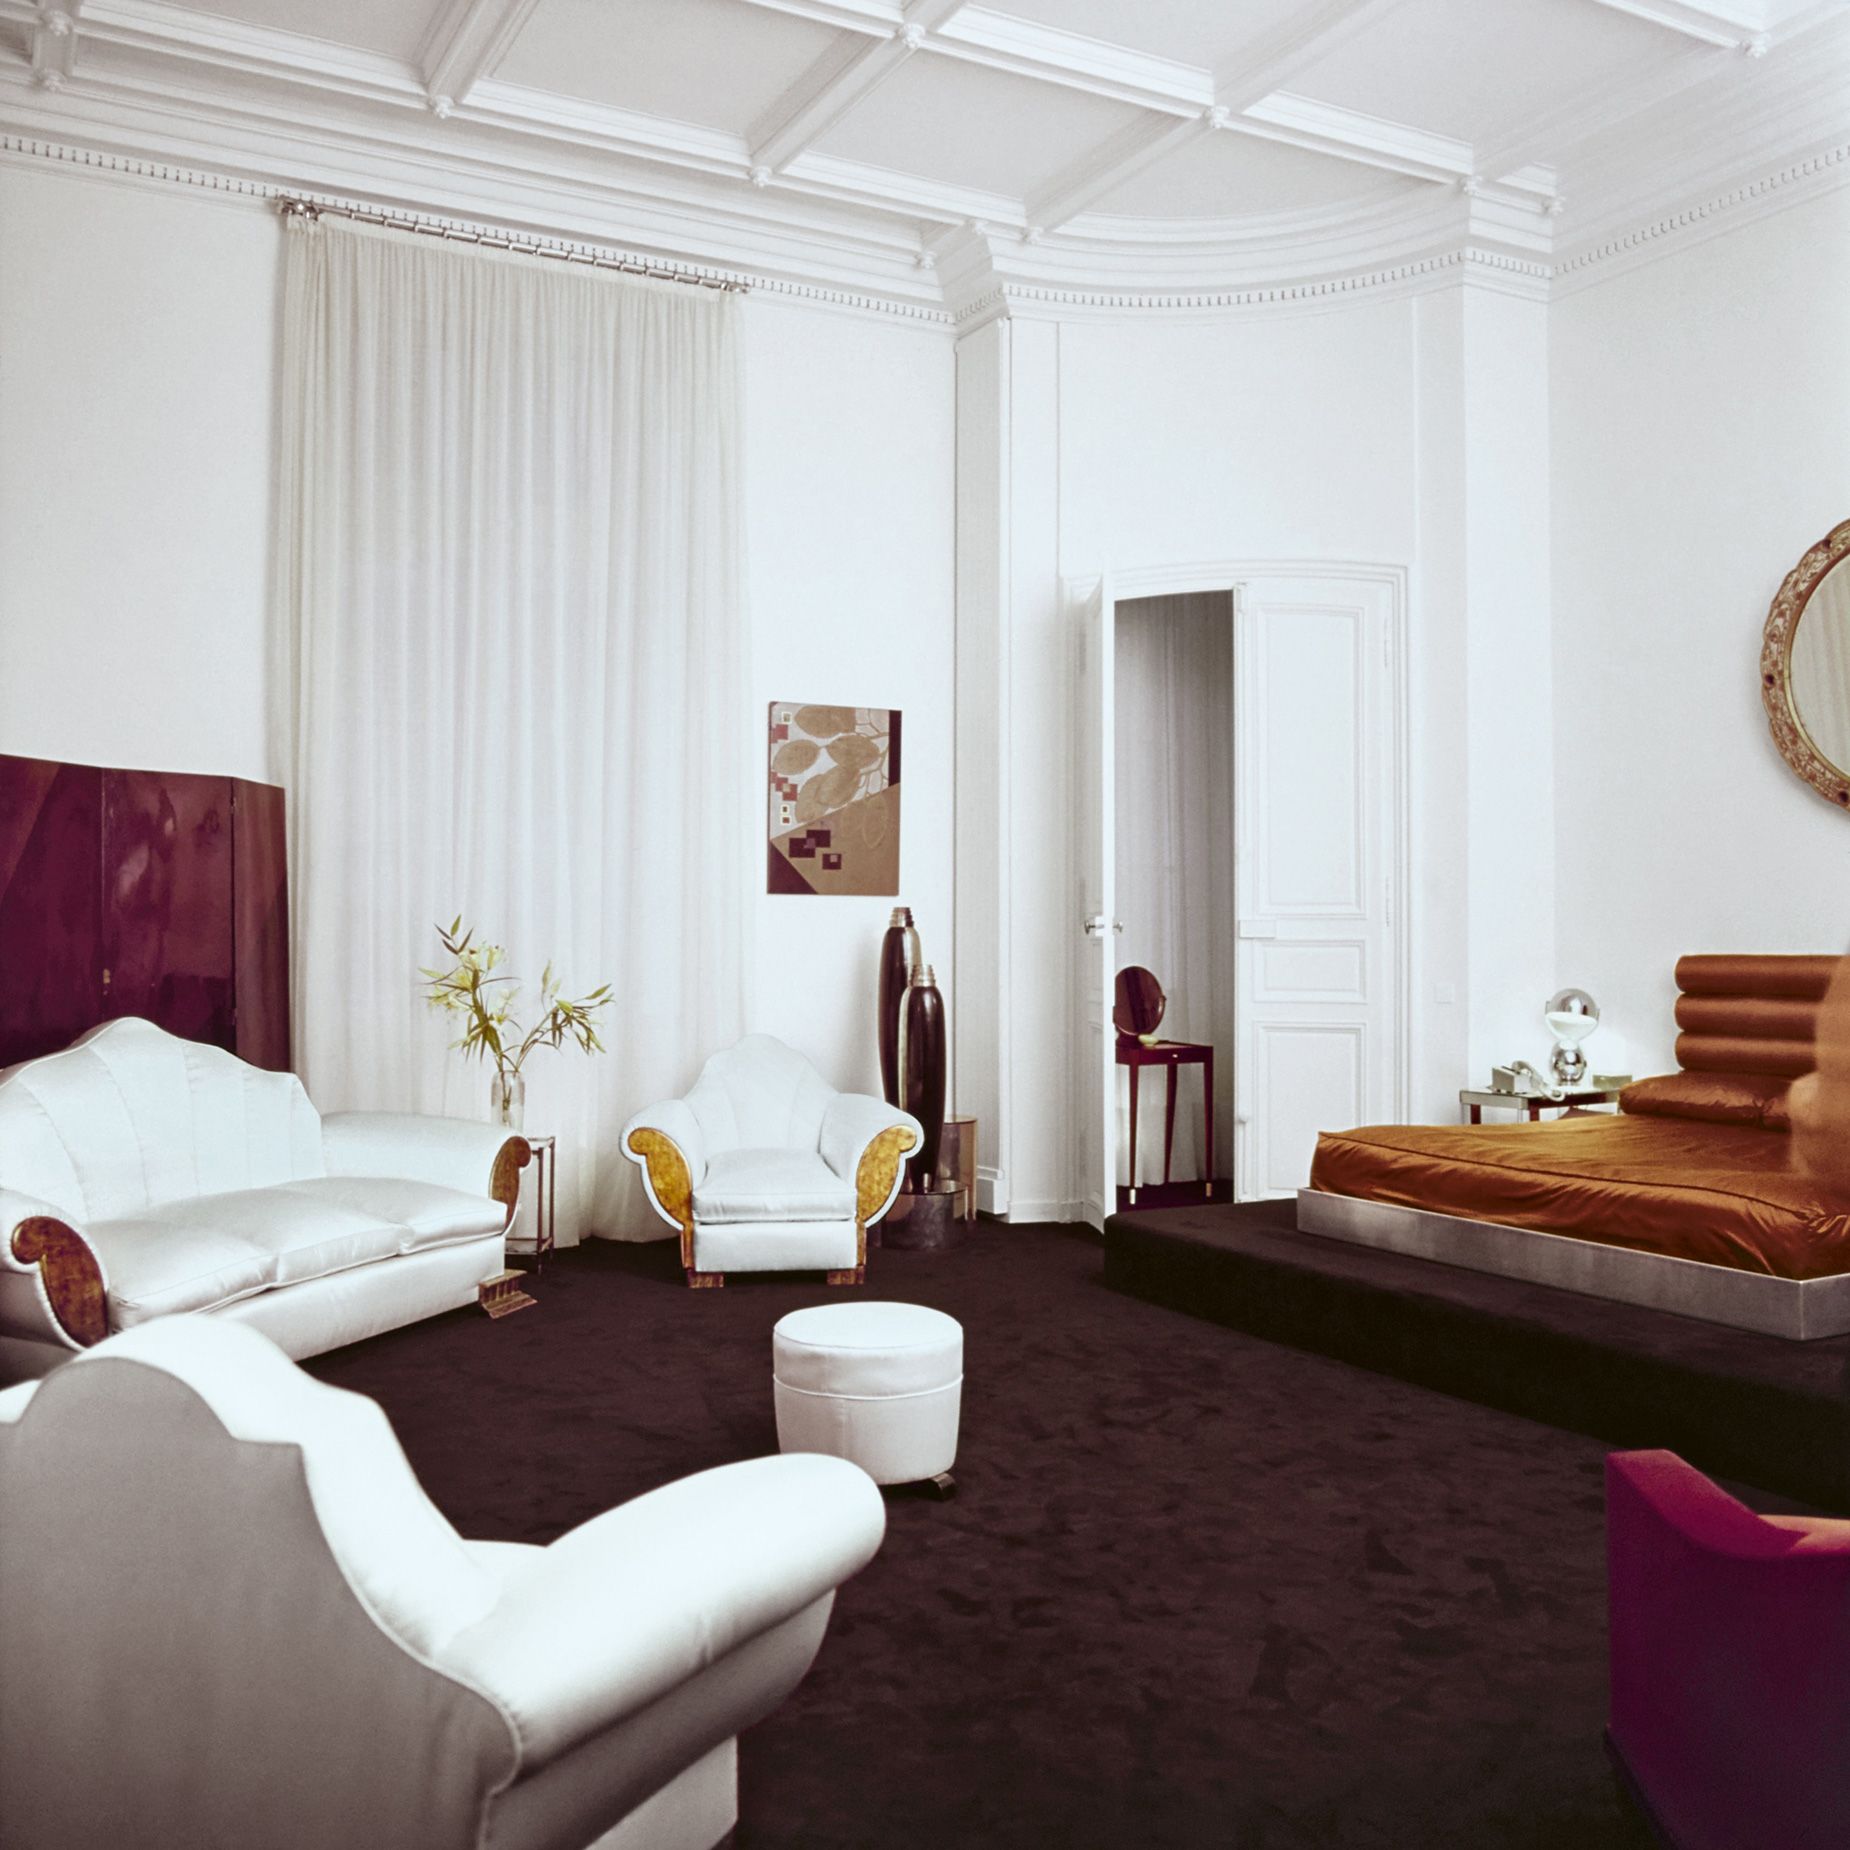 The apartment's living space and bedroom, featuring a "seashell" sofa and matching armchairs, as well as a modular platform bed.